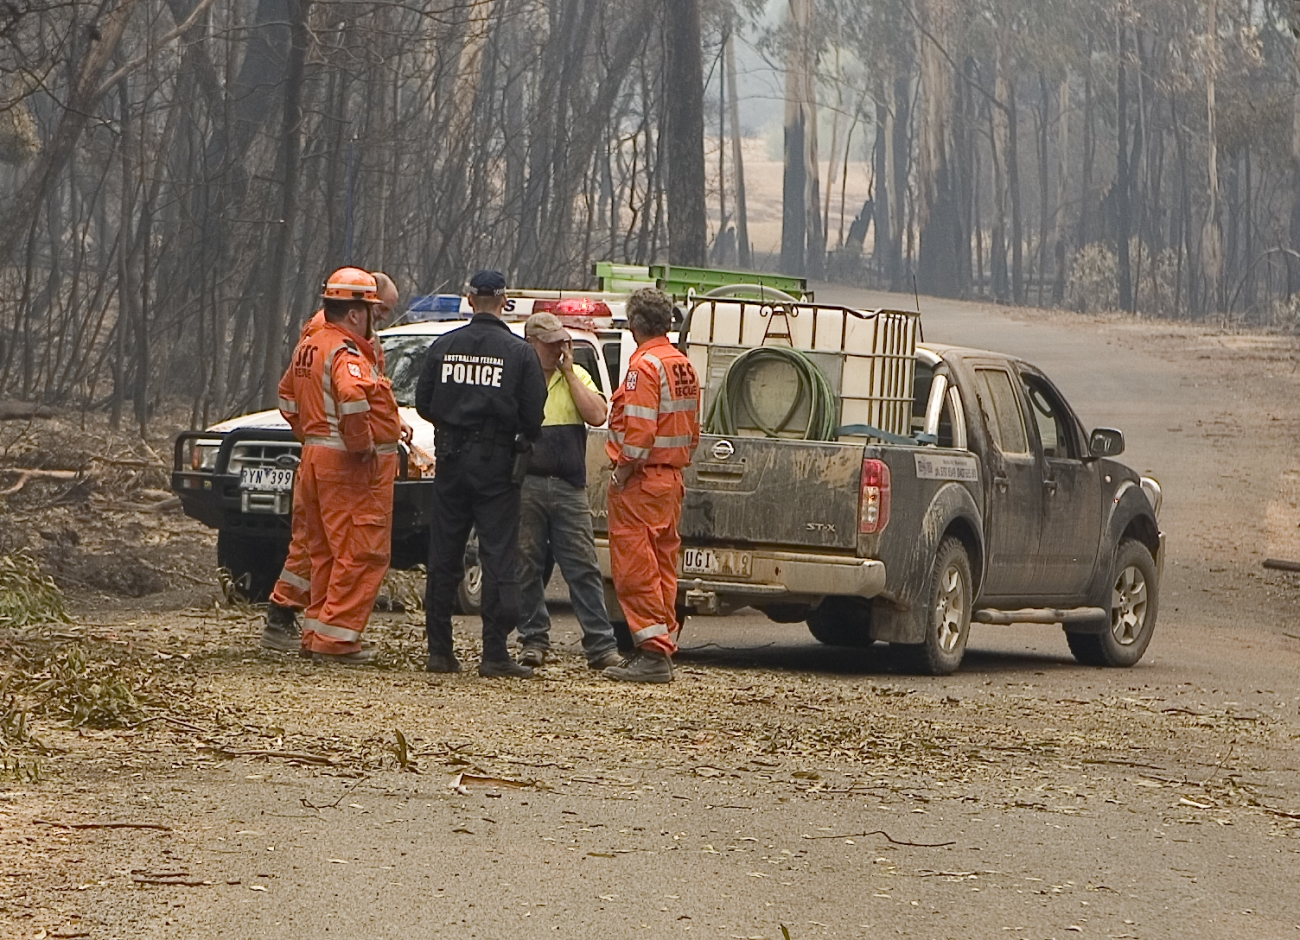 AFP Officer meets with SES personnel and Victorian resident as part of their deployment following the ‘Black Saturday’ Bushfires of 7 February 2009 (AFPM12890)